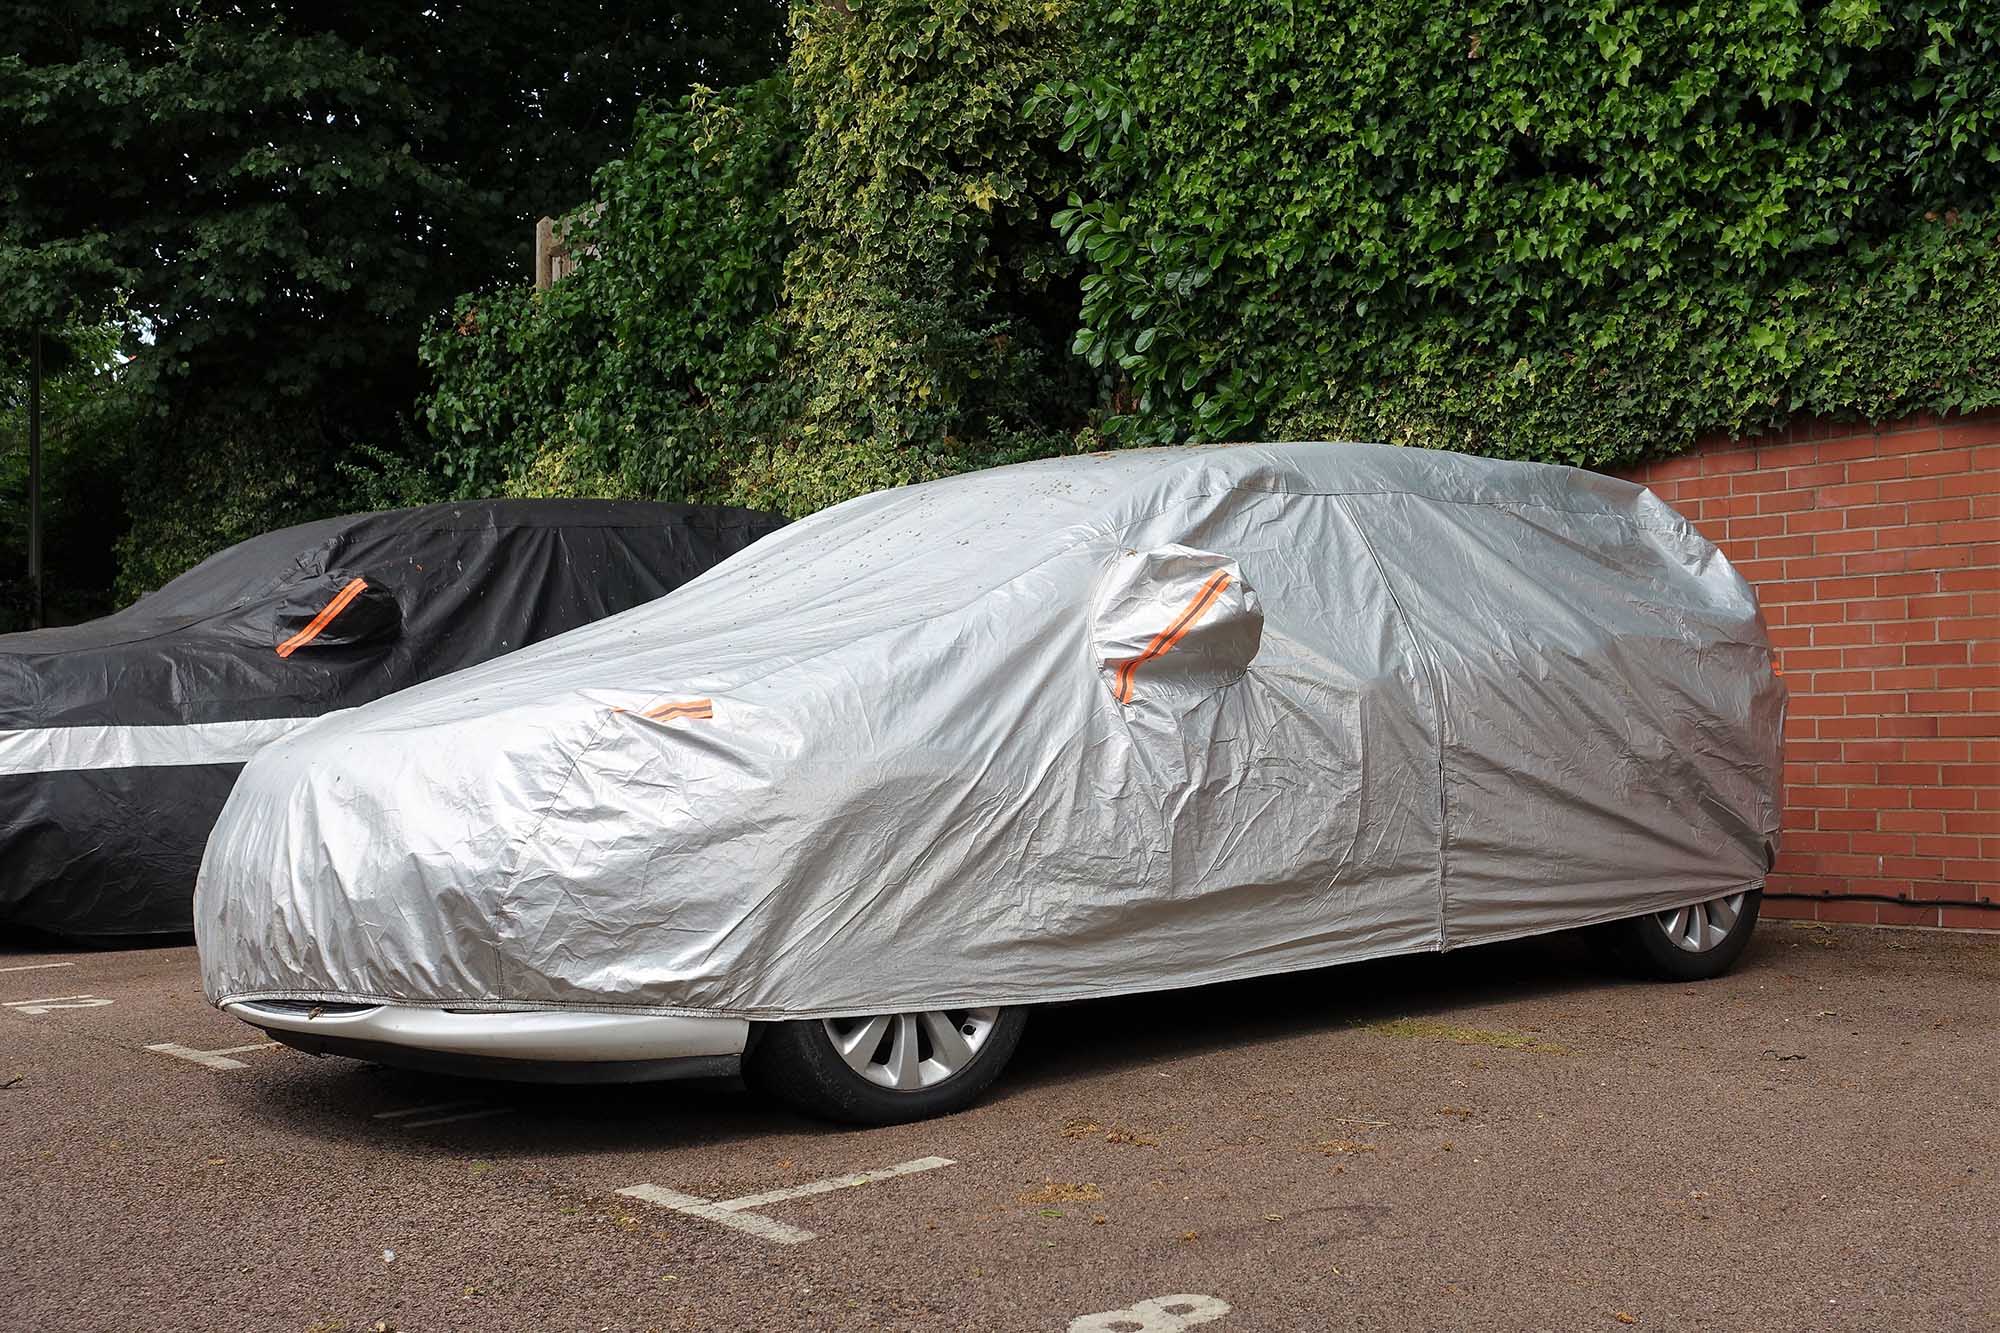 Two cars under vehicle covers parked next to brick wall